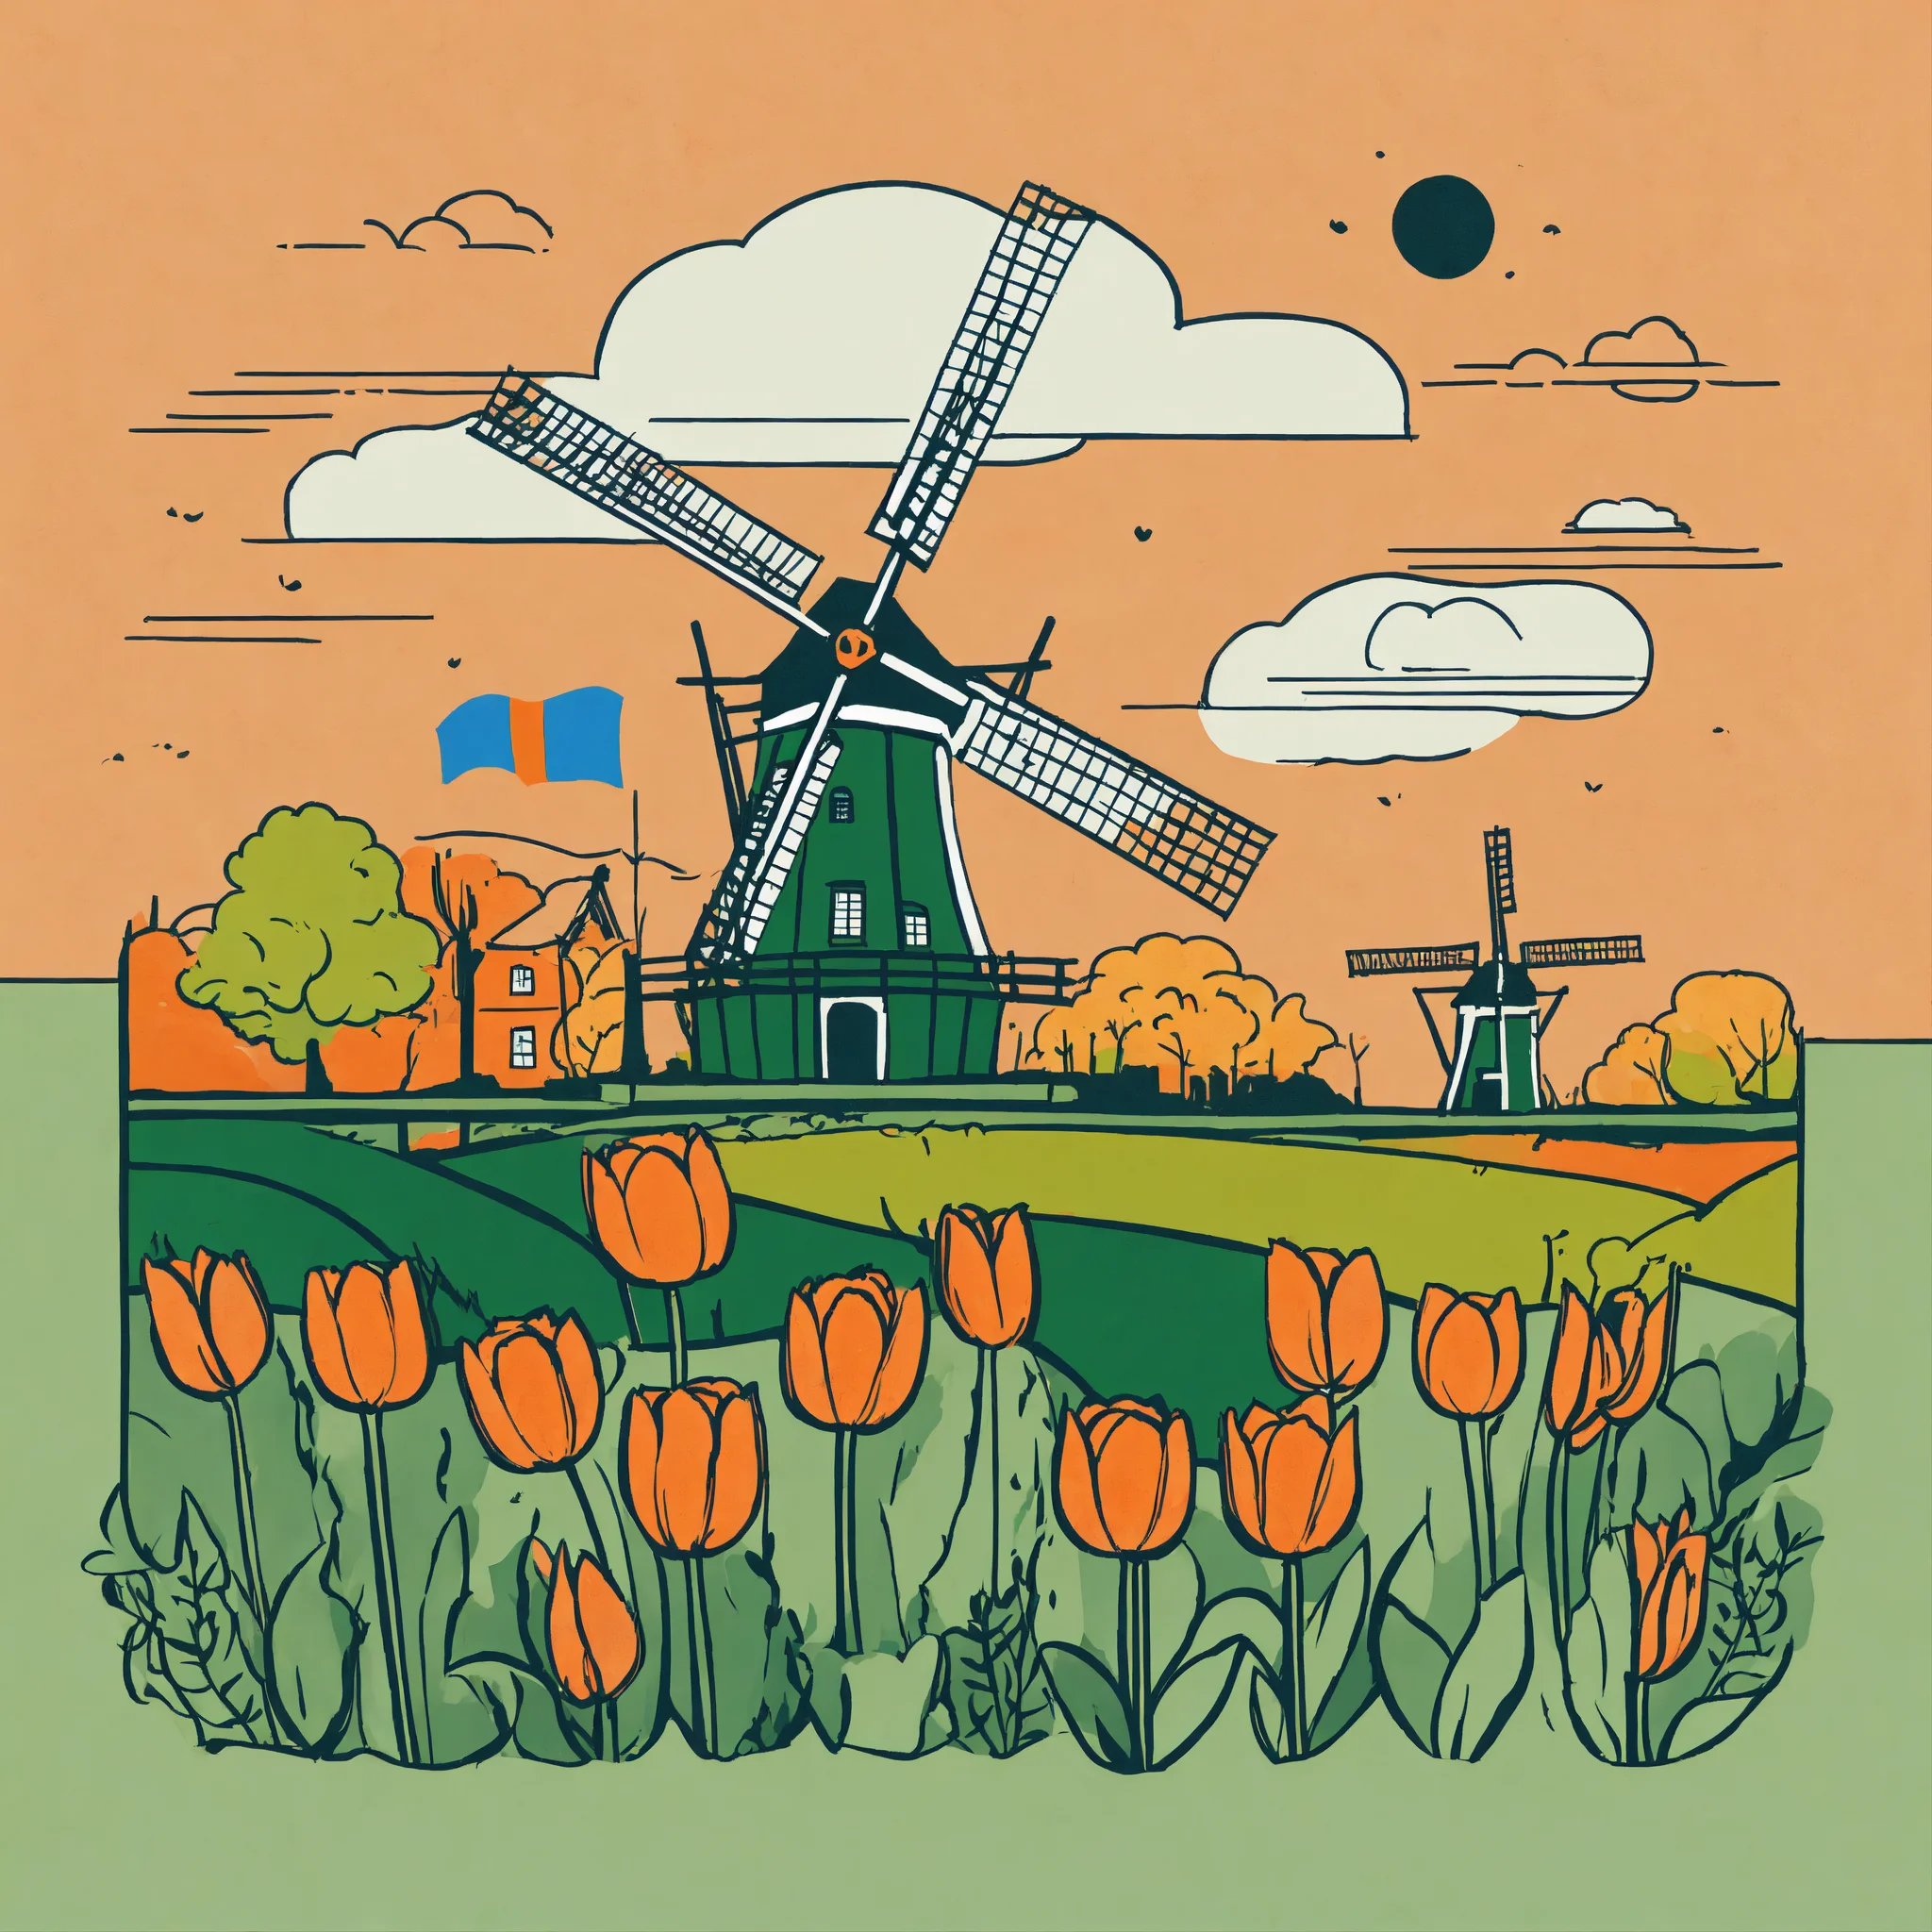 image of the Netherlands